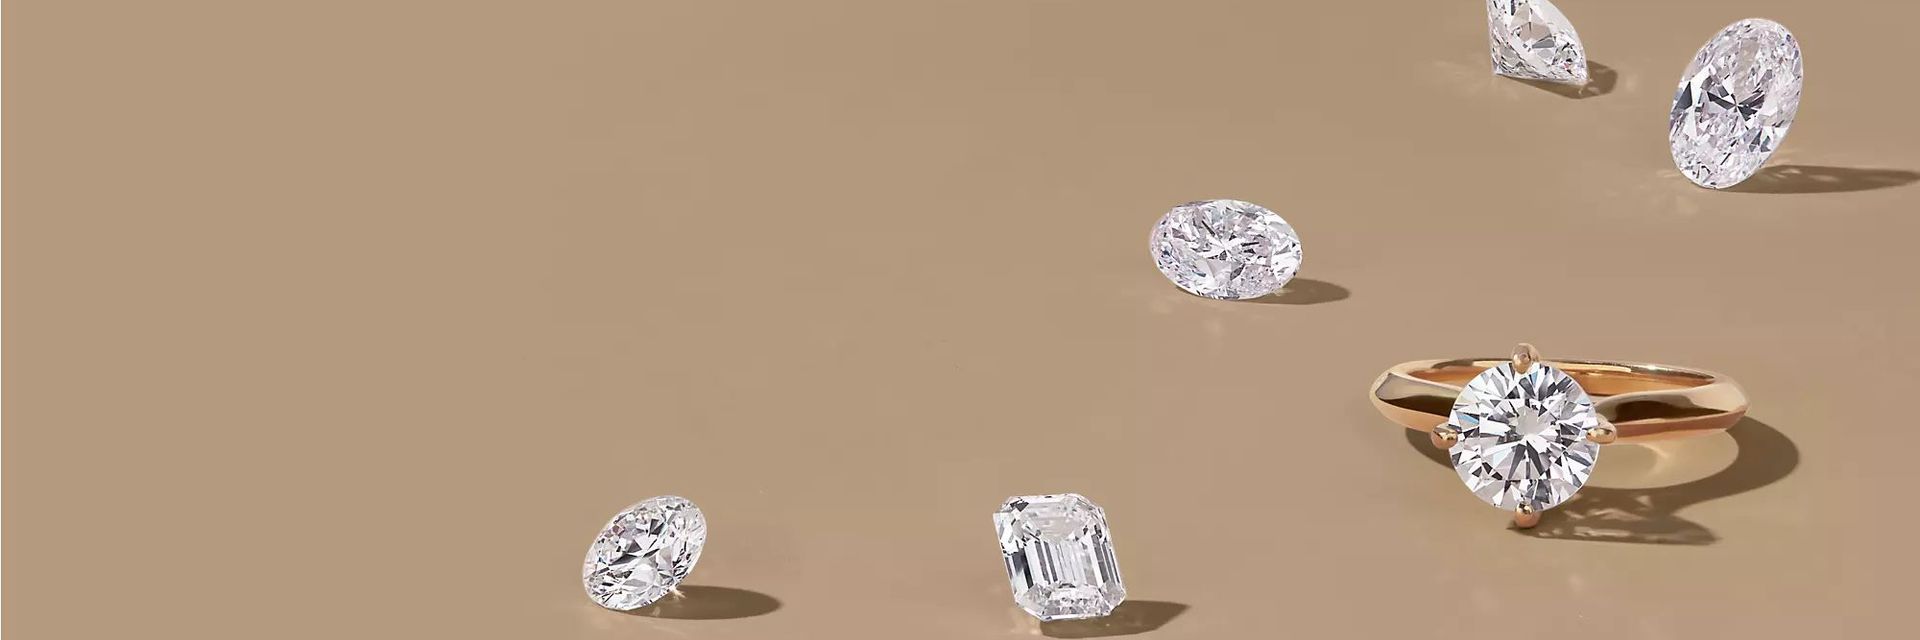 Gold Vs. Diamond: Which Is Best to Invest?